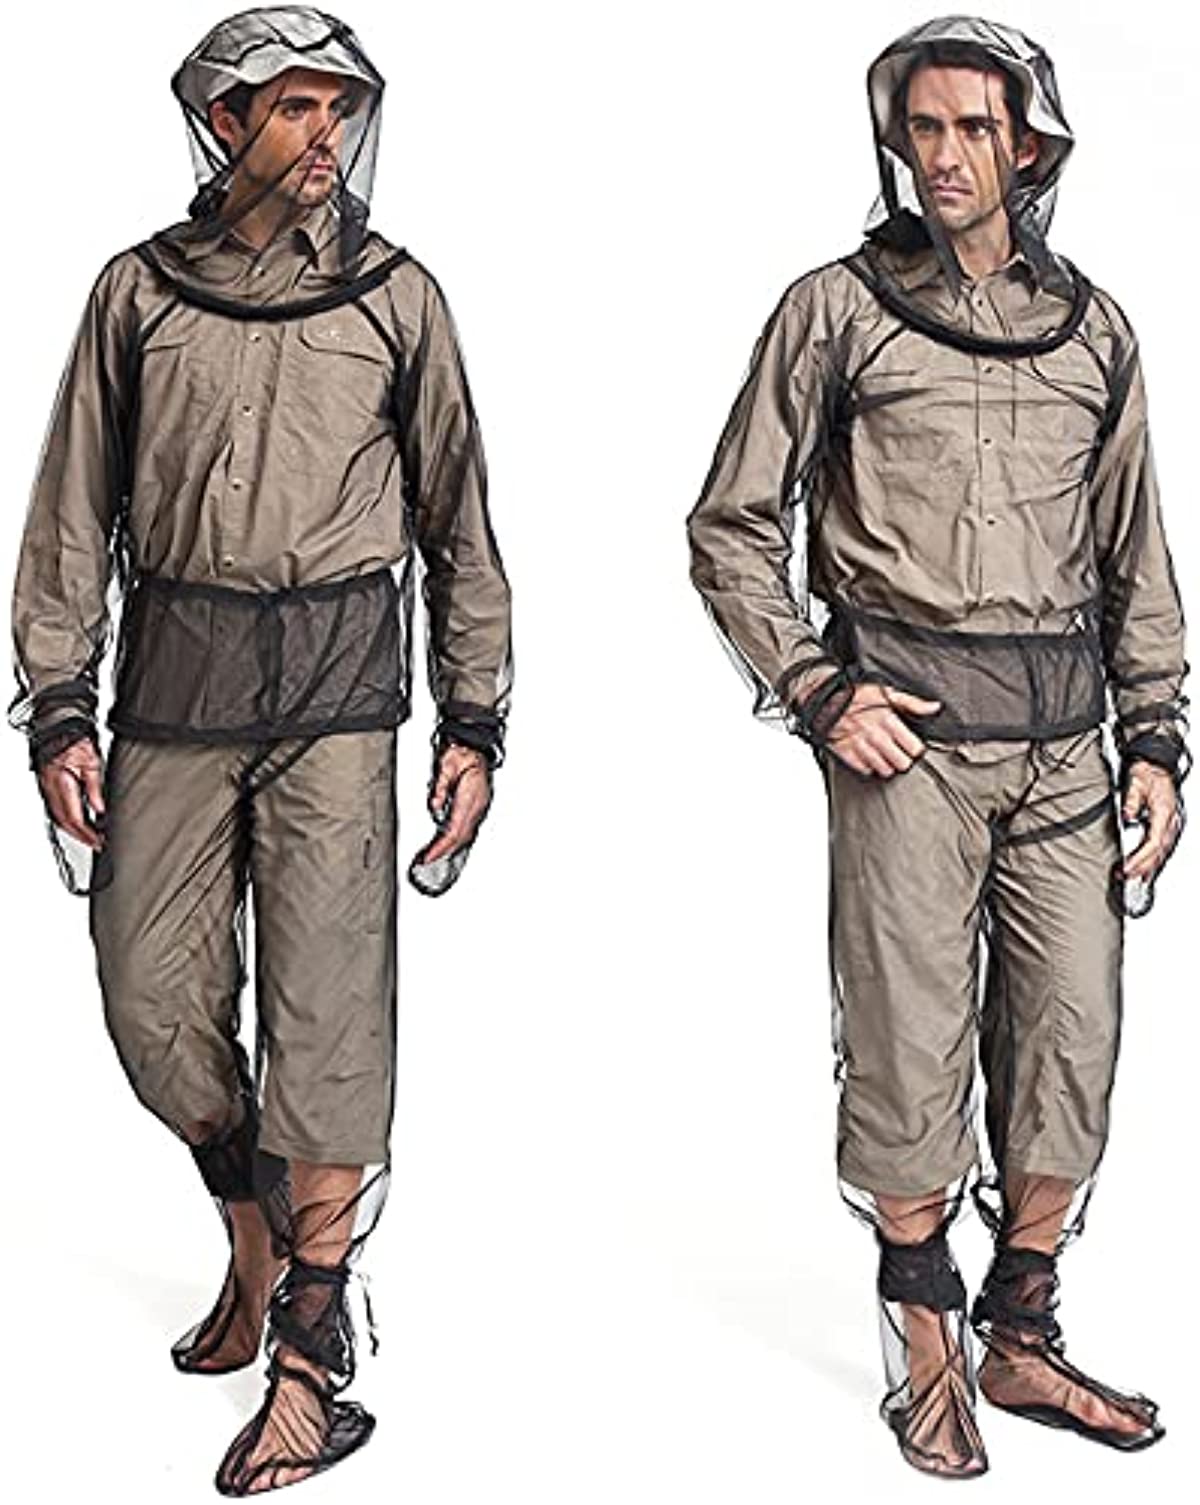 Sofiey 4 Pieces Mosquito Net Suit– Jacket Hood & Pants& Mitts & Socks Sets Light-Weight& Breathable Mesh Clothing for Men & Women, Ideal for Fishing, Hiking, Camping, Farming and Gardening (L/XL)